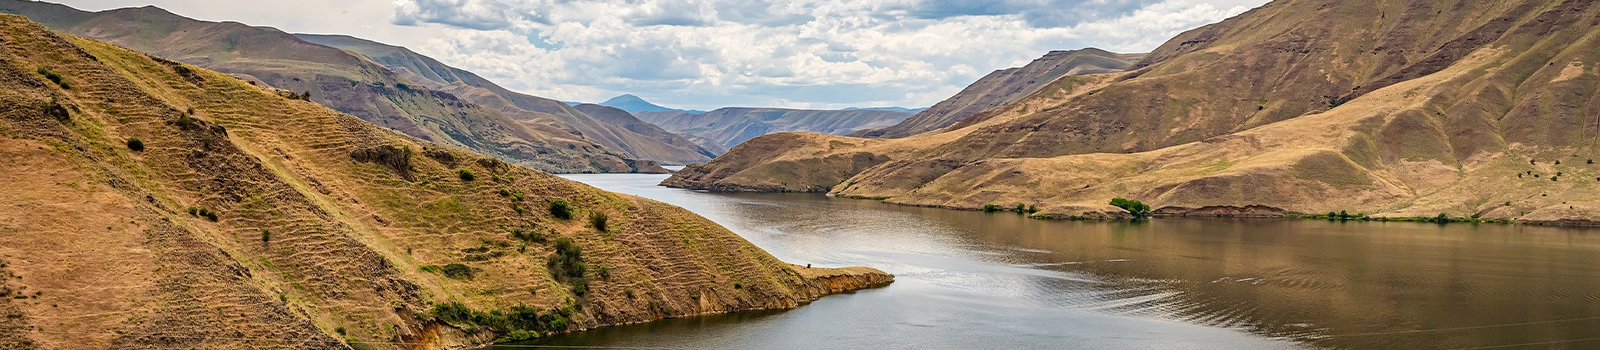 Panoramic view of Hells Canyon river